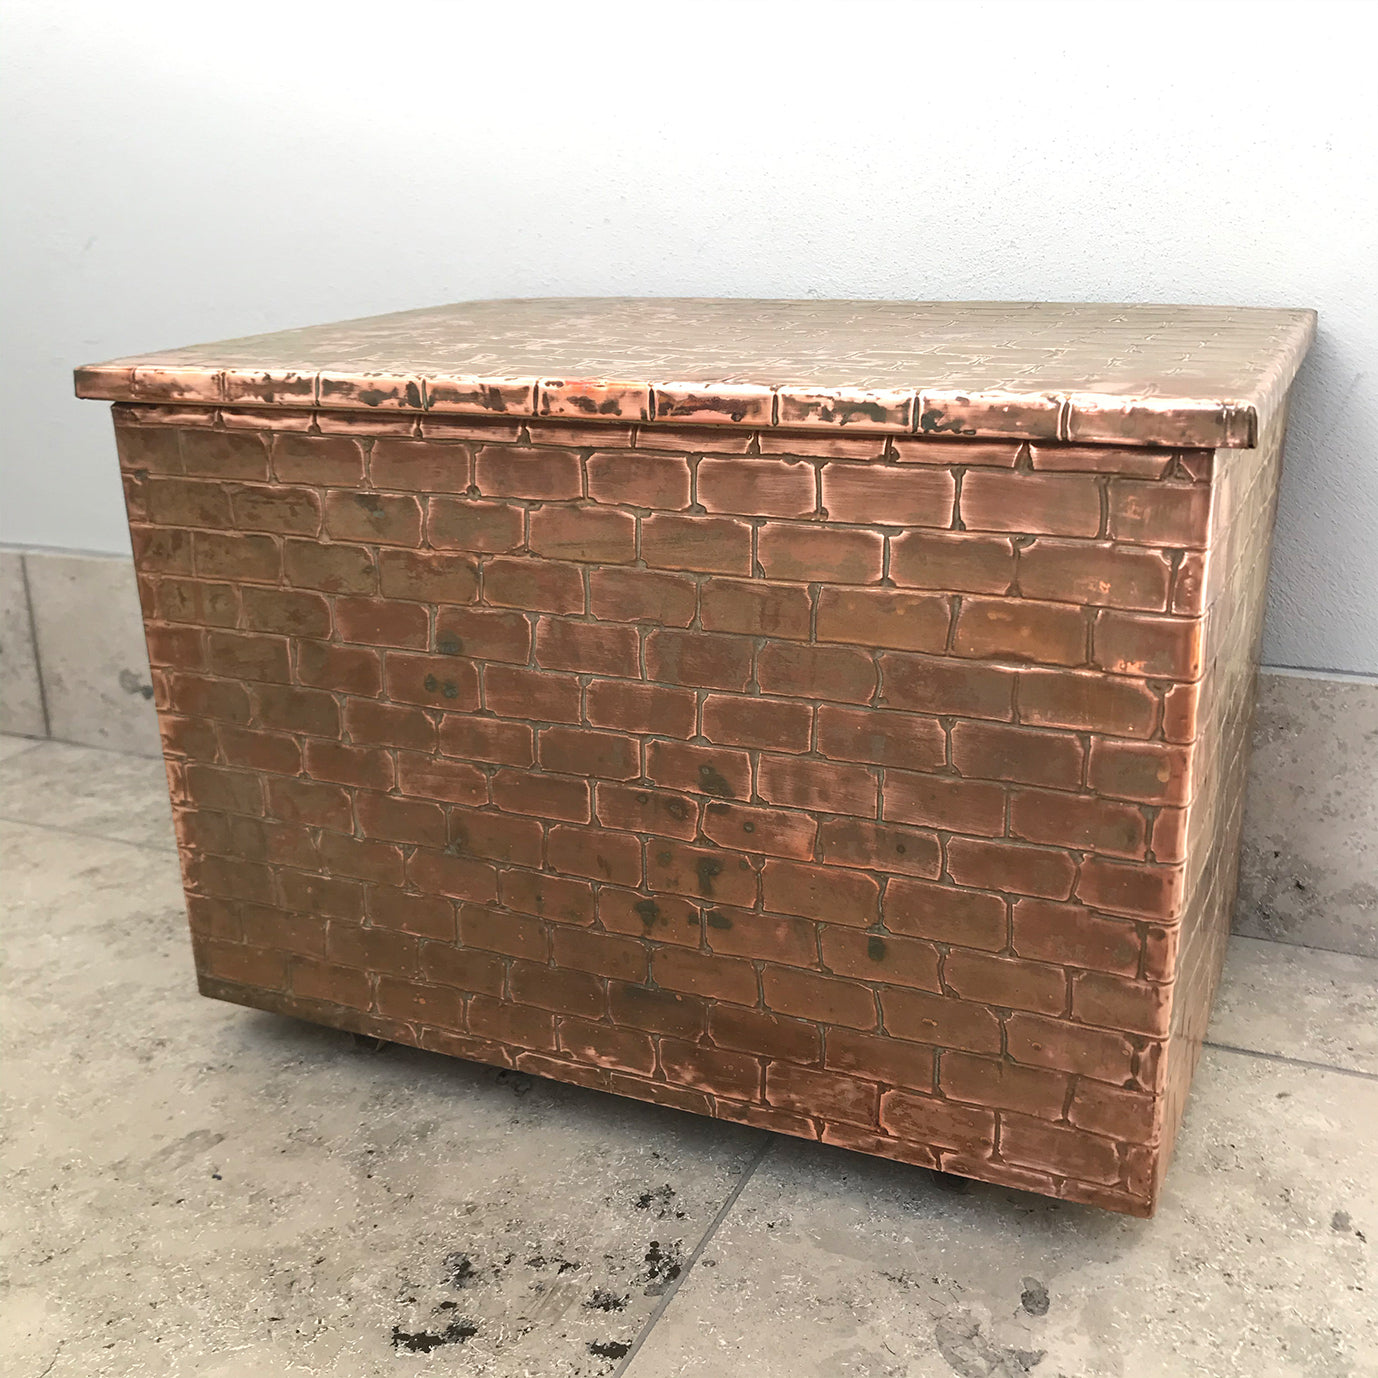 Stylish useful Vintage Copper trunk. It has a brick like pattern and a great patina - SHOP NOW - www.intovintage.co.uk